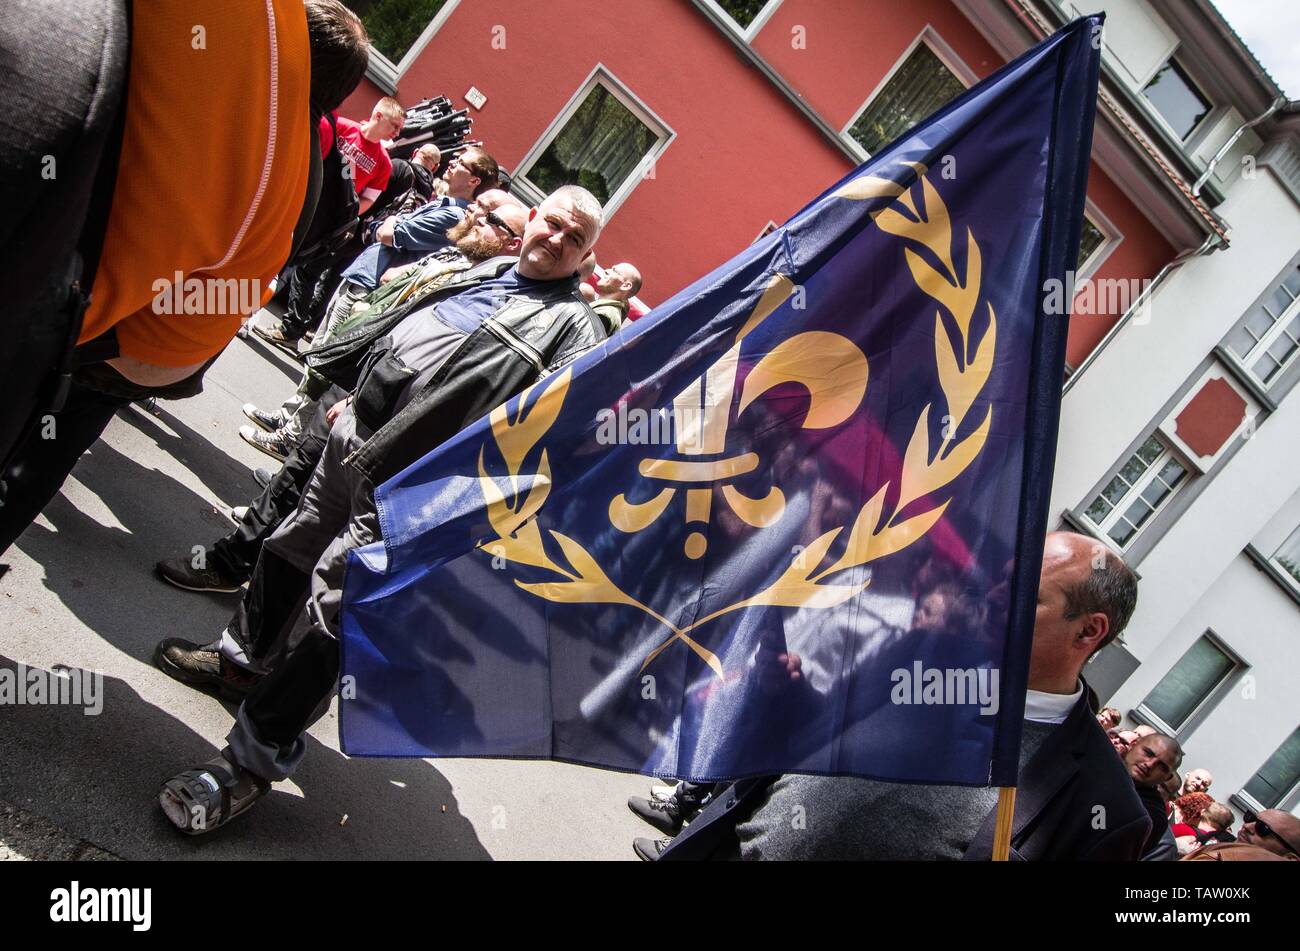 Dortmund, Nordrhein Westfalen, Germany. 25th May, 2019. Supporters of the French Nationalist Party (Parti nationaliste français) were at a neonazi event in Dortmund, Germany. Prior to the European Elections, the neonazi party Die Rechte (The Right) organized a rally in the German city of Dortmund to promote their candidate, the incarcerated Holocaust denier Ursula Haverbeck. The demonstration and march were organized by prominent local political figure and neonazi activist Michael Brueck (Michael BrÃ¼ck) who enlisted the help of not only German neonazis, but also assistance from Russian, Bu Stock Photo